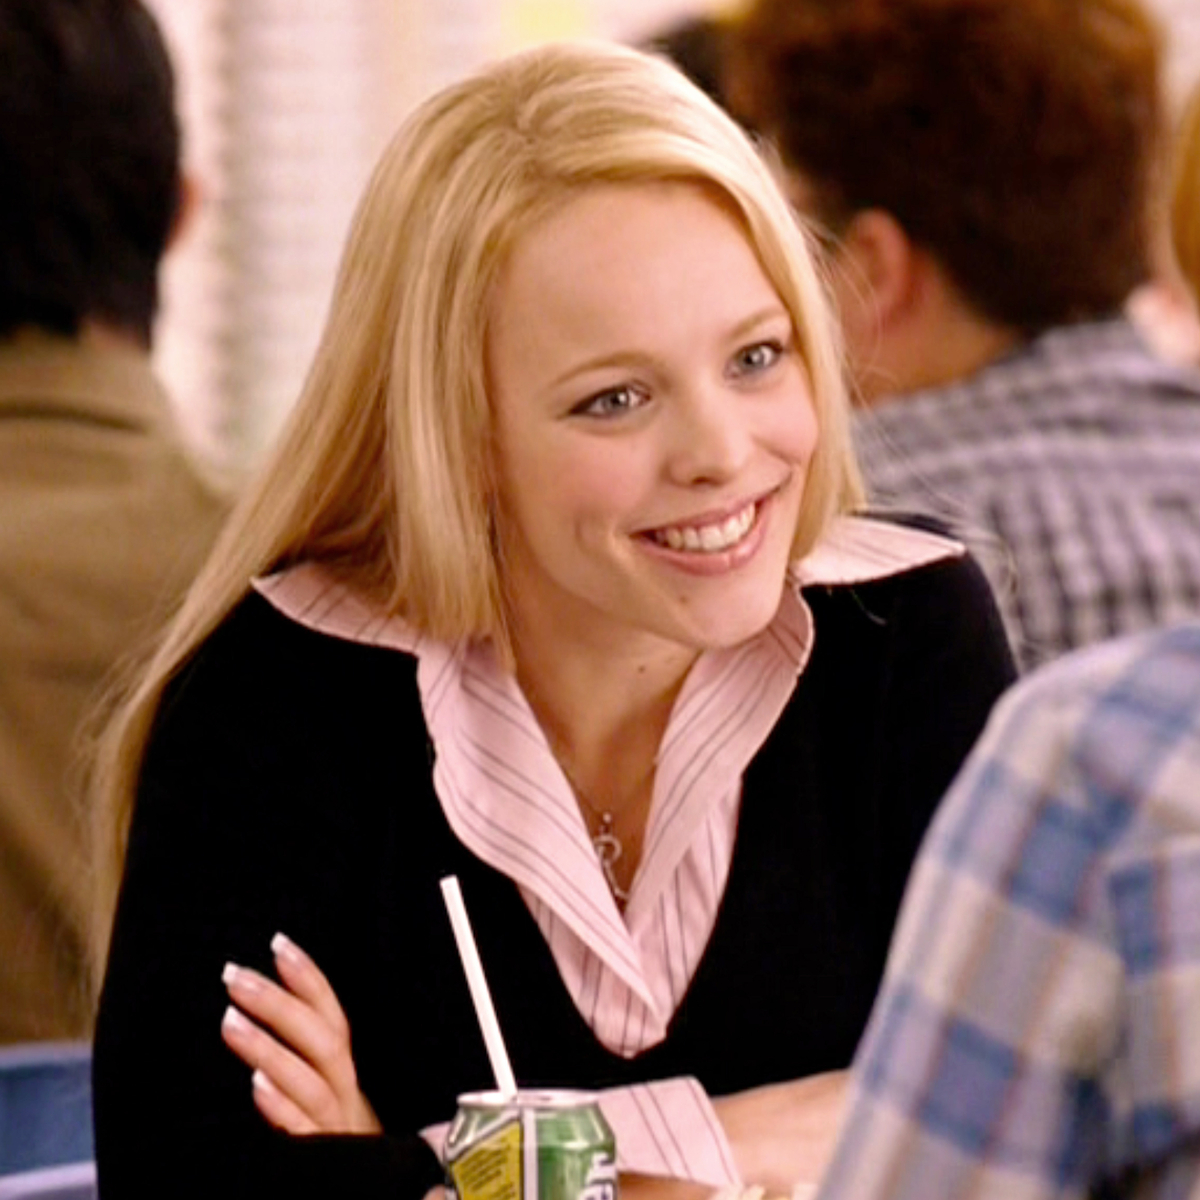 The Exposed Bra trend from Mean Girls is back, and it's having a